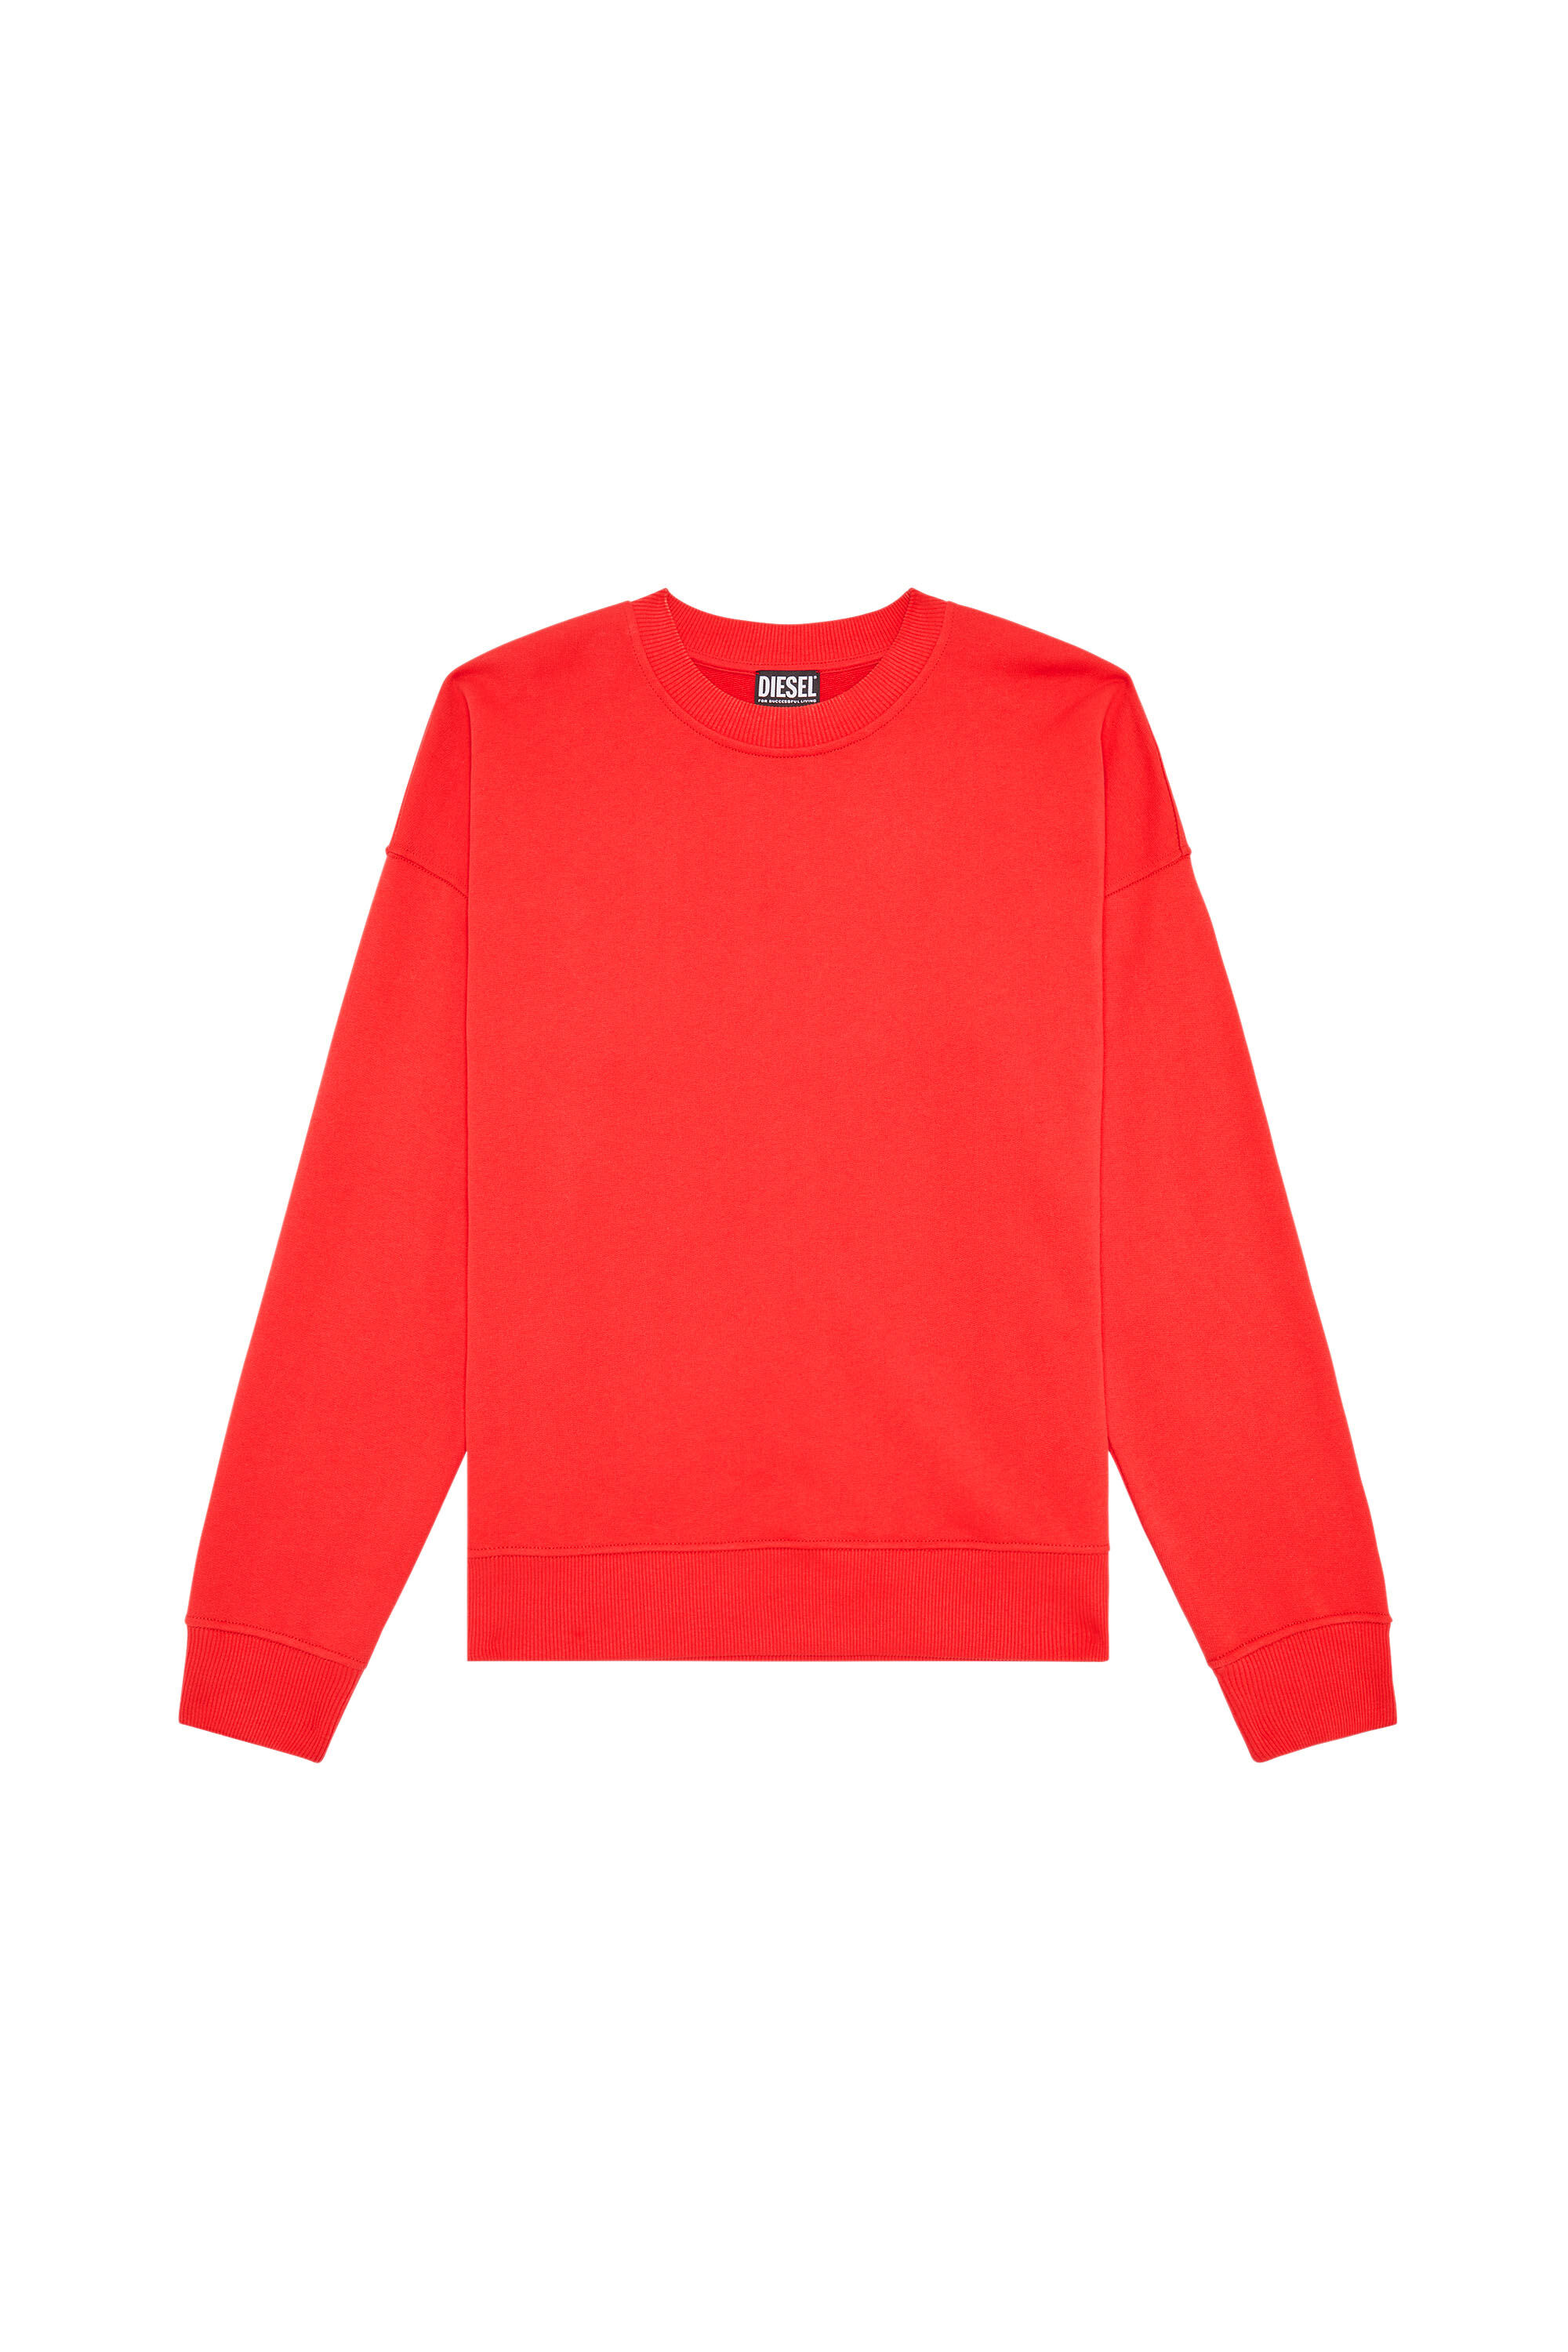 Diesel - S-ROB-MEGOVAL, Man Sweatshirt with back maxi D logo in Red - Image 2